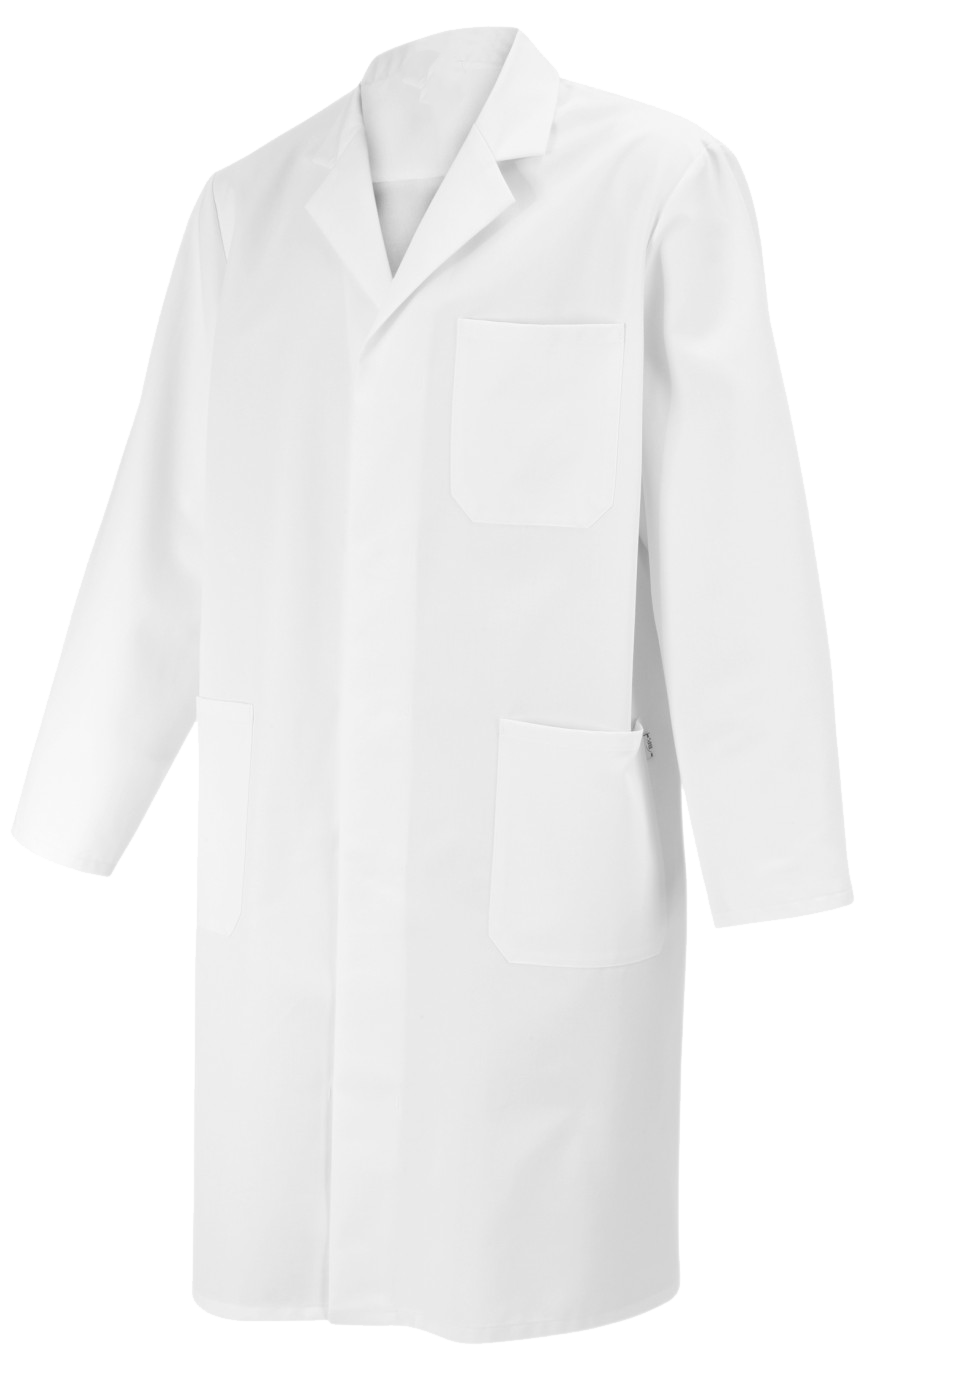 Laboratory Coat - MALE & FEMALE by SMSG